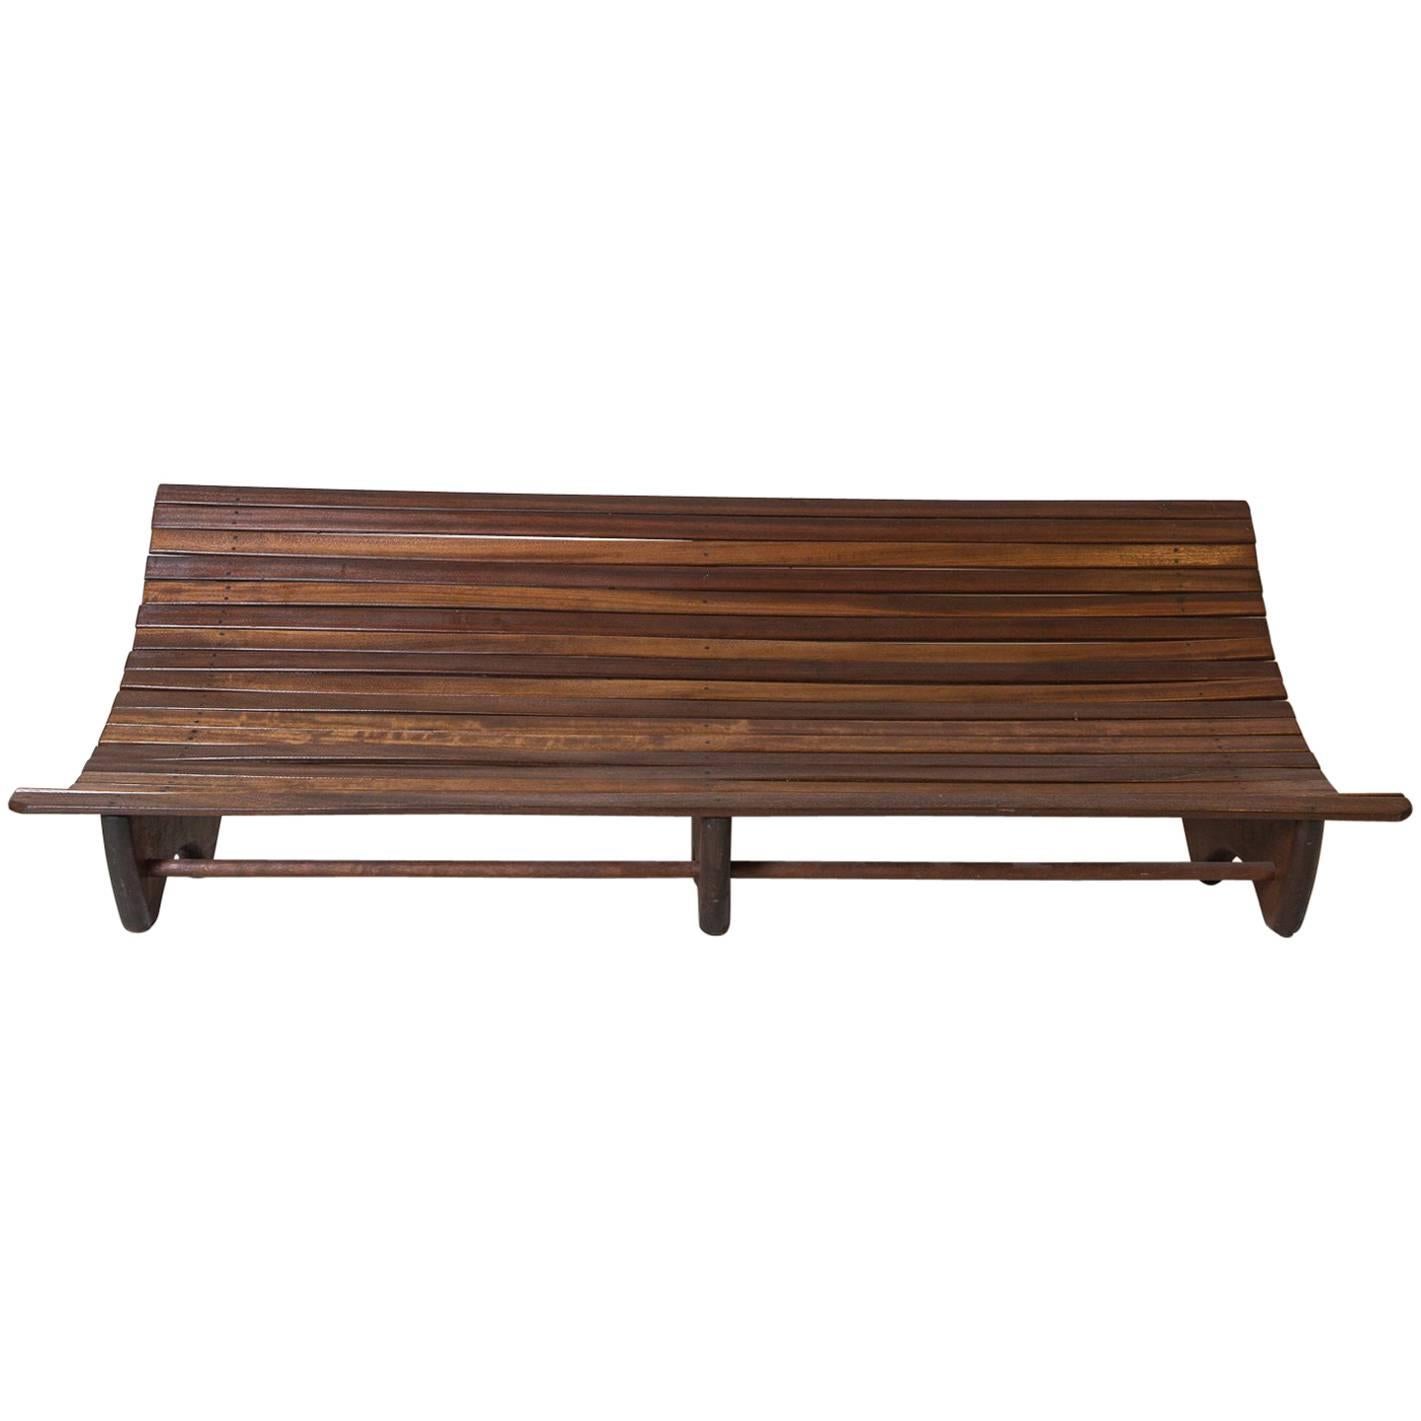 Wood Stained Brazilian Curved Slatted Bench with Three Legs